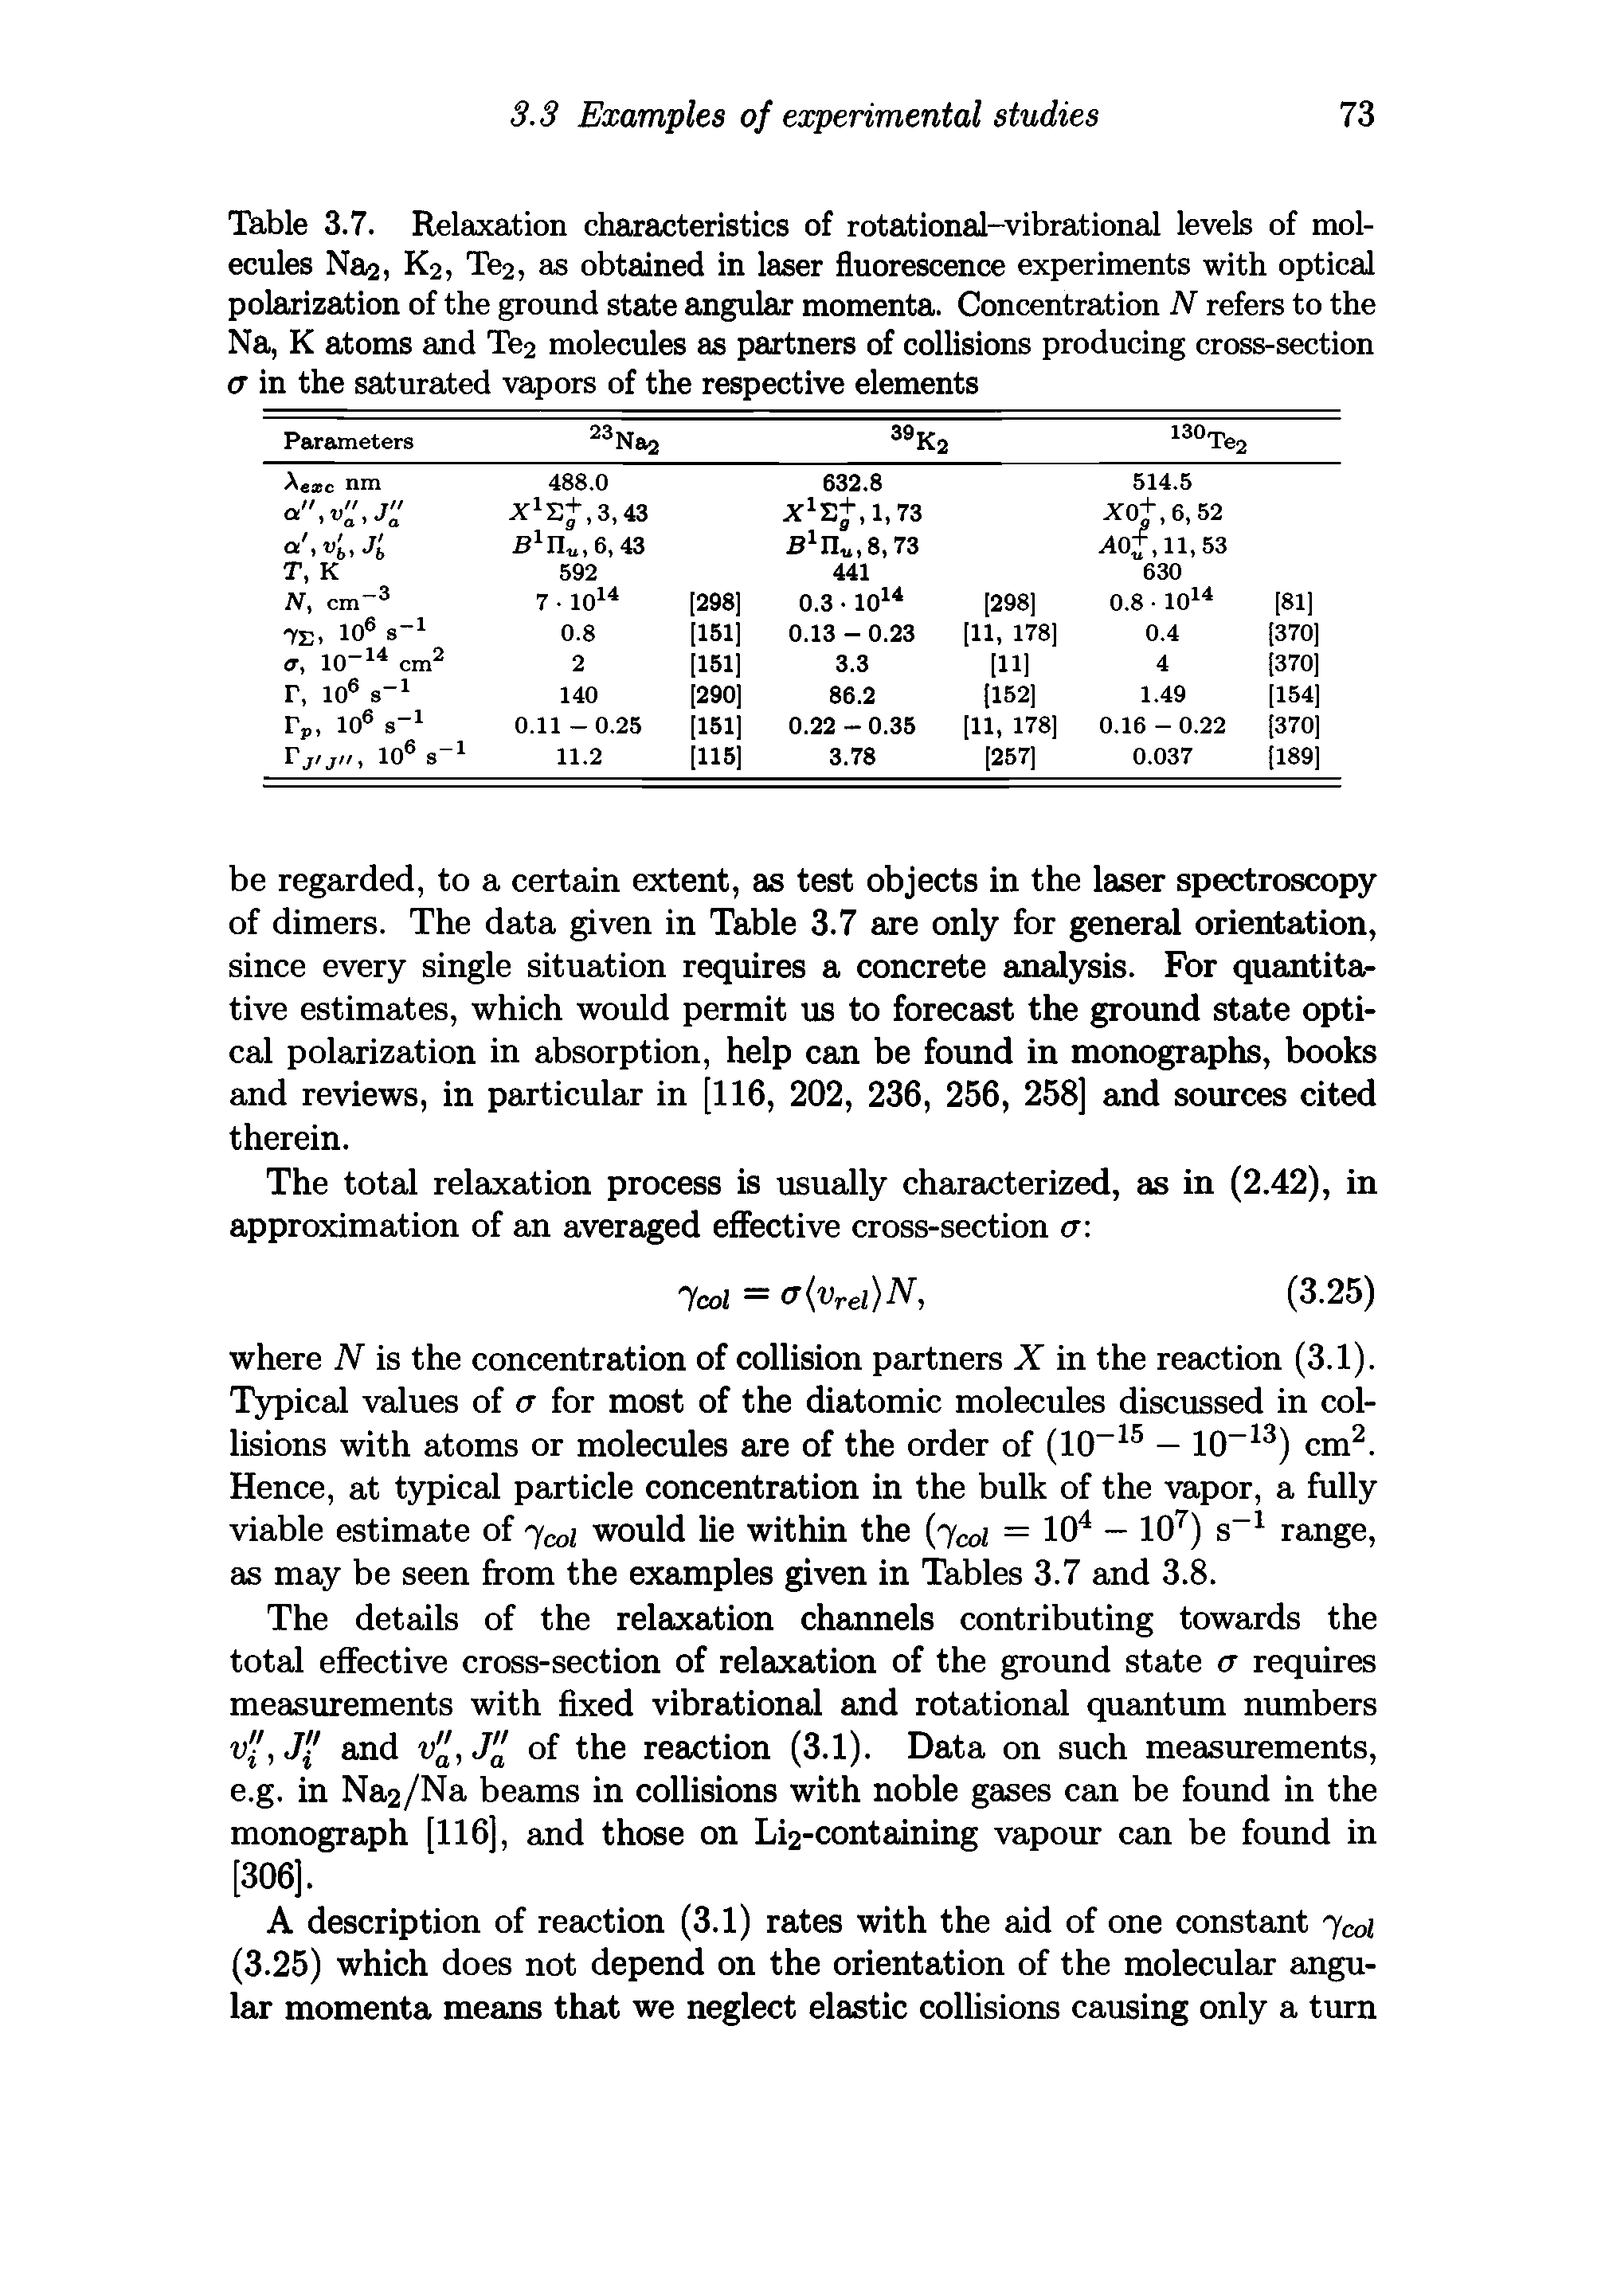 Table 3.7. Relaxation characteristics of rotational-vibrational levels of molecules Na2, K2, Te2, as obtained in laser fluorescence experiments with optical polarization of the ground state angular momenta. Concentration N refers to the Na, K atoms and Te2 molecules as partners of collisions producing cross-section a in the saturated vapors of the respective elements...